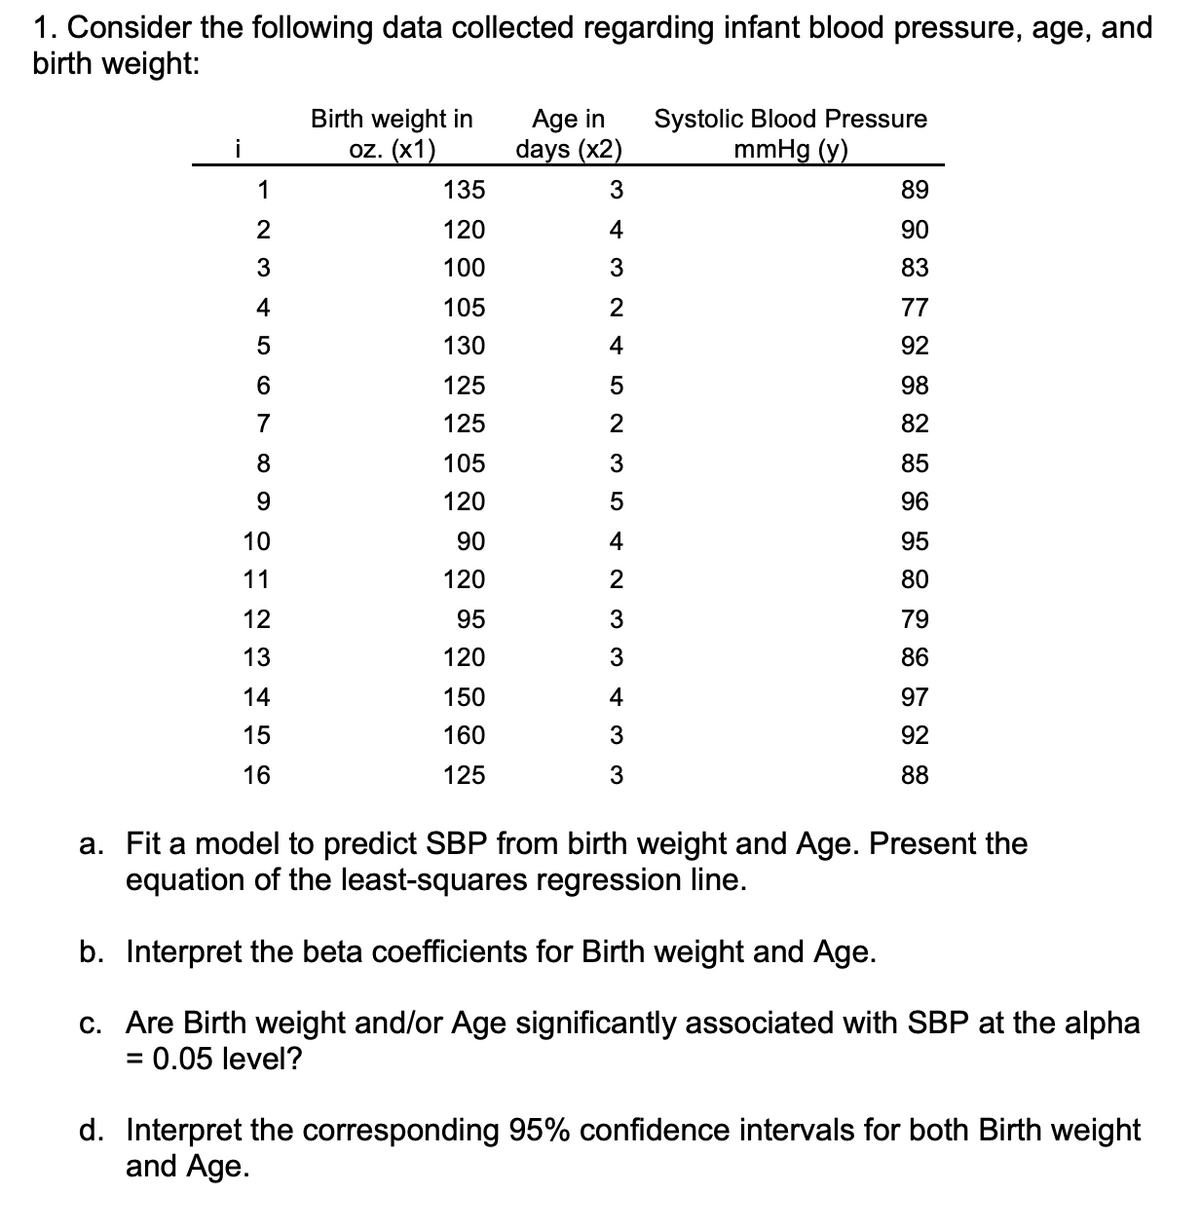 1. Consider the following data collected regarding infant blood pressure, age, and
birth weight:
i
1
2
3
4
5
6
7
8
9
10
11
12
13
14
15
16
Birth weight in
oz. (x1)
135
120
100
105
130
125
125
105
120
90
120
95
120
150
160
125
Age in
days (x2)
3
4
3
2
4
5
2
3
5
4
2
3
3
4
3
3
Systolic Blood Pressure
mmHg (y)
89
90
83
77
92
98
82
85
96
95
80
79
86
97
92
88
a. Fit a model to predict SBP from birth weight and Age. Present the
equation of the least-squares regression line.
b. Interpret the beta coefficients for Birth weight and Age.
c. Are Birth weight and/or Age significantly associated with SBP at the alpha
= 0.05 level?
d. Interpret the corresponding 95% confidence intervals for both Birth weight
and Age.